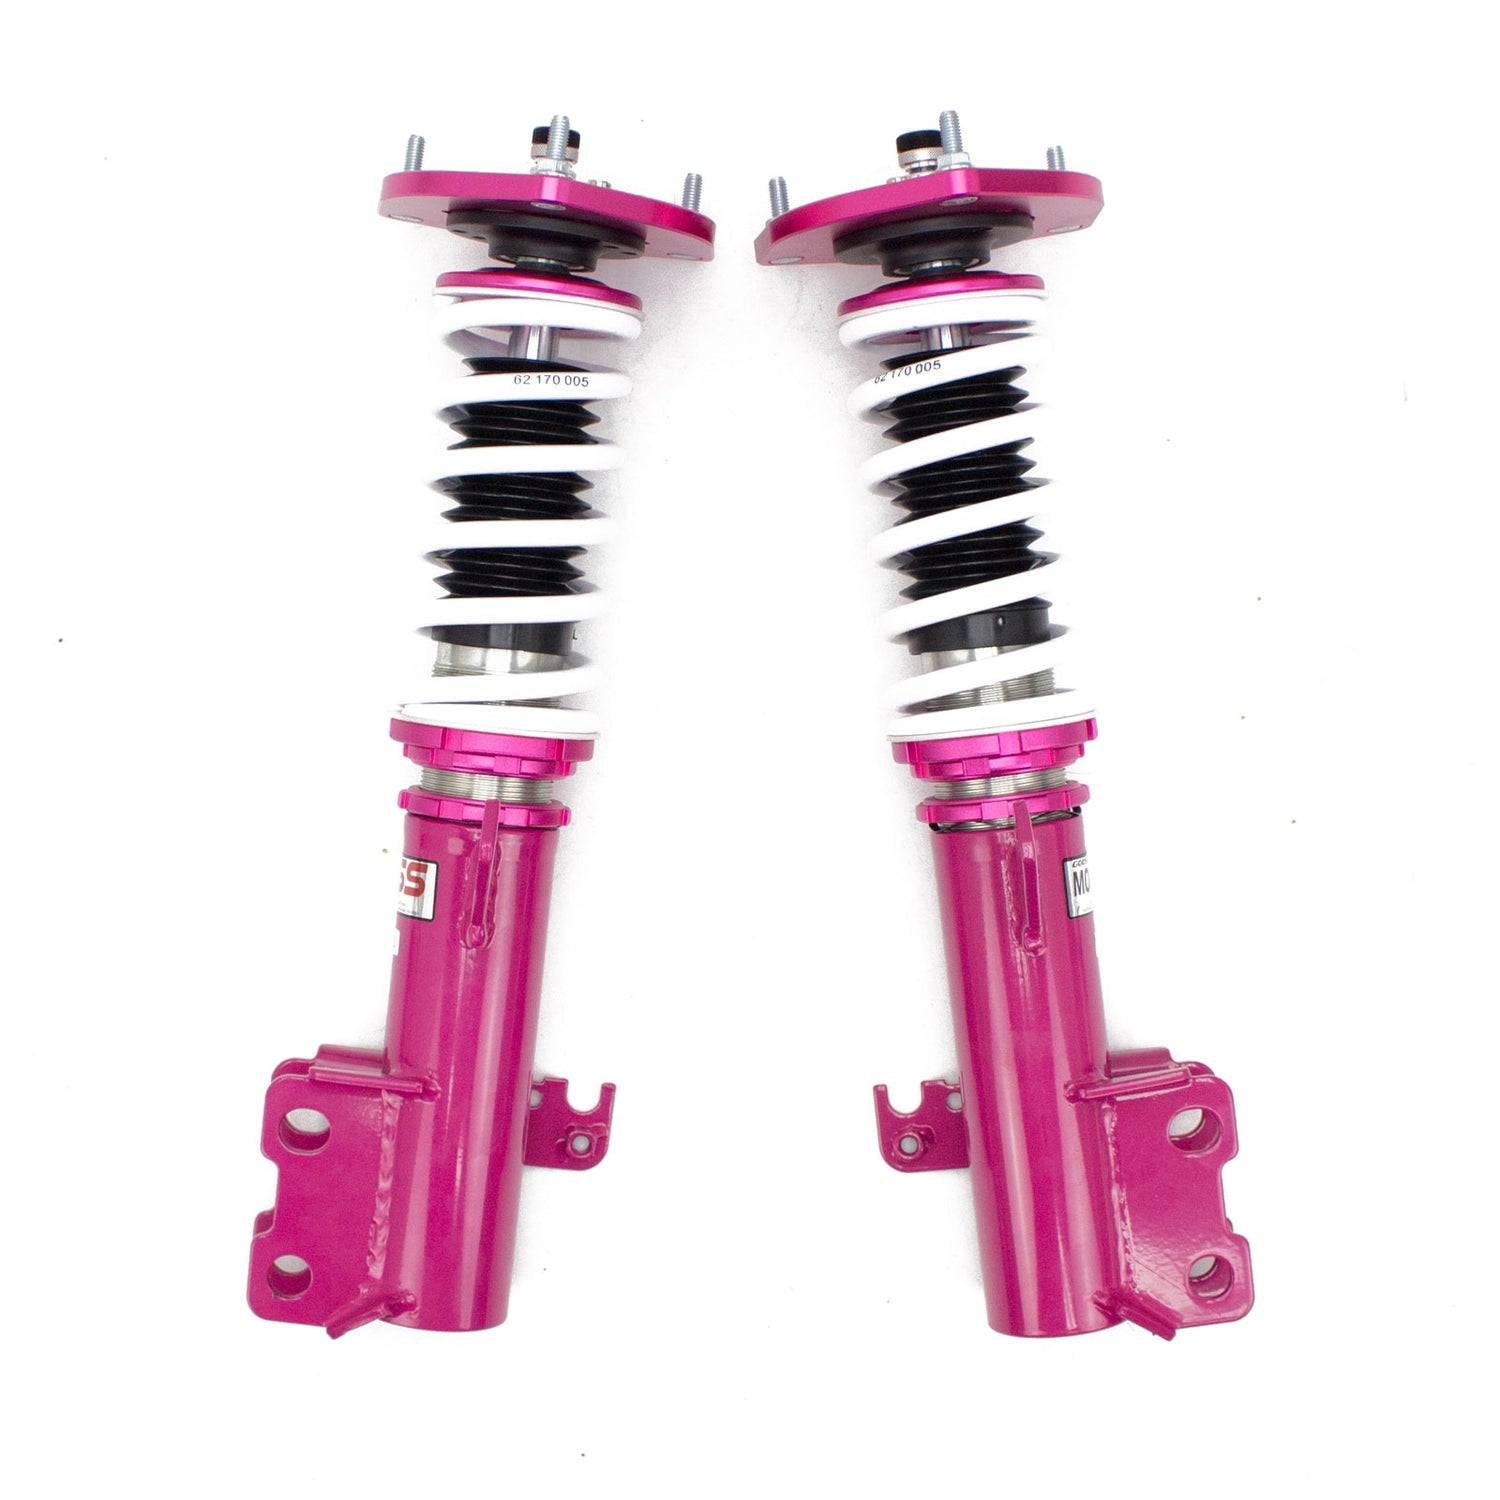 Godspeed(MSS0192) MonoSS Coilover Lowering Kit, Adjustable Ride Height, 16-Clicks Damping Setting, Improved Spring Rate